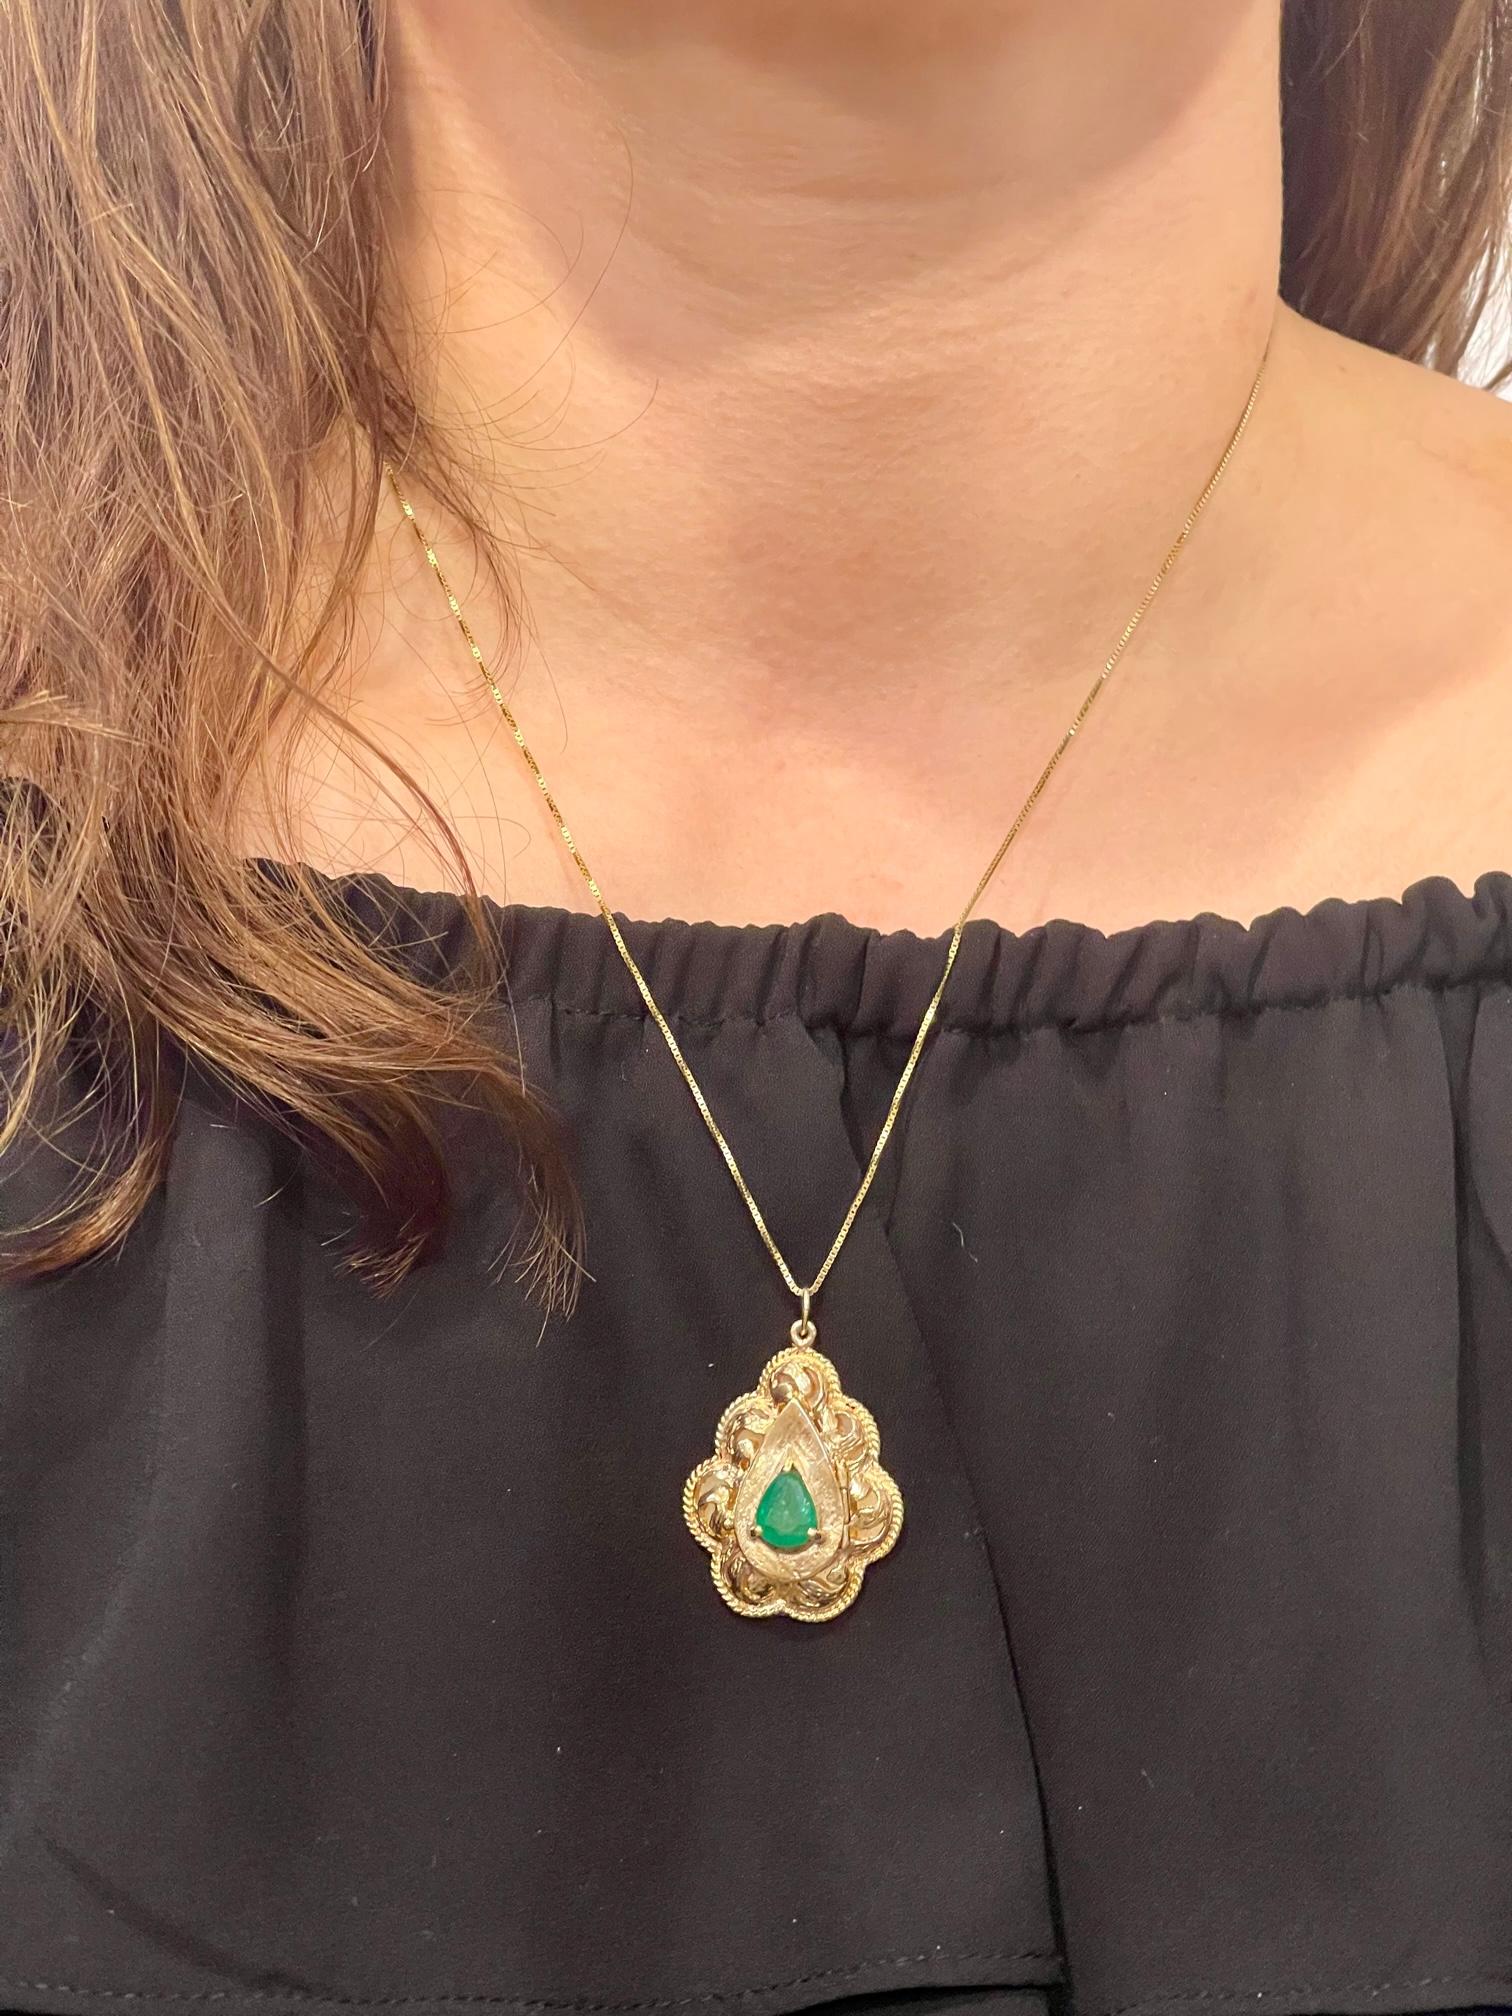 Women's Vintage 14 Karat Yellow Gold 10.5 Gm Chain with Locket and Natural Emerald For Sale